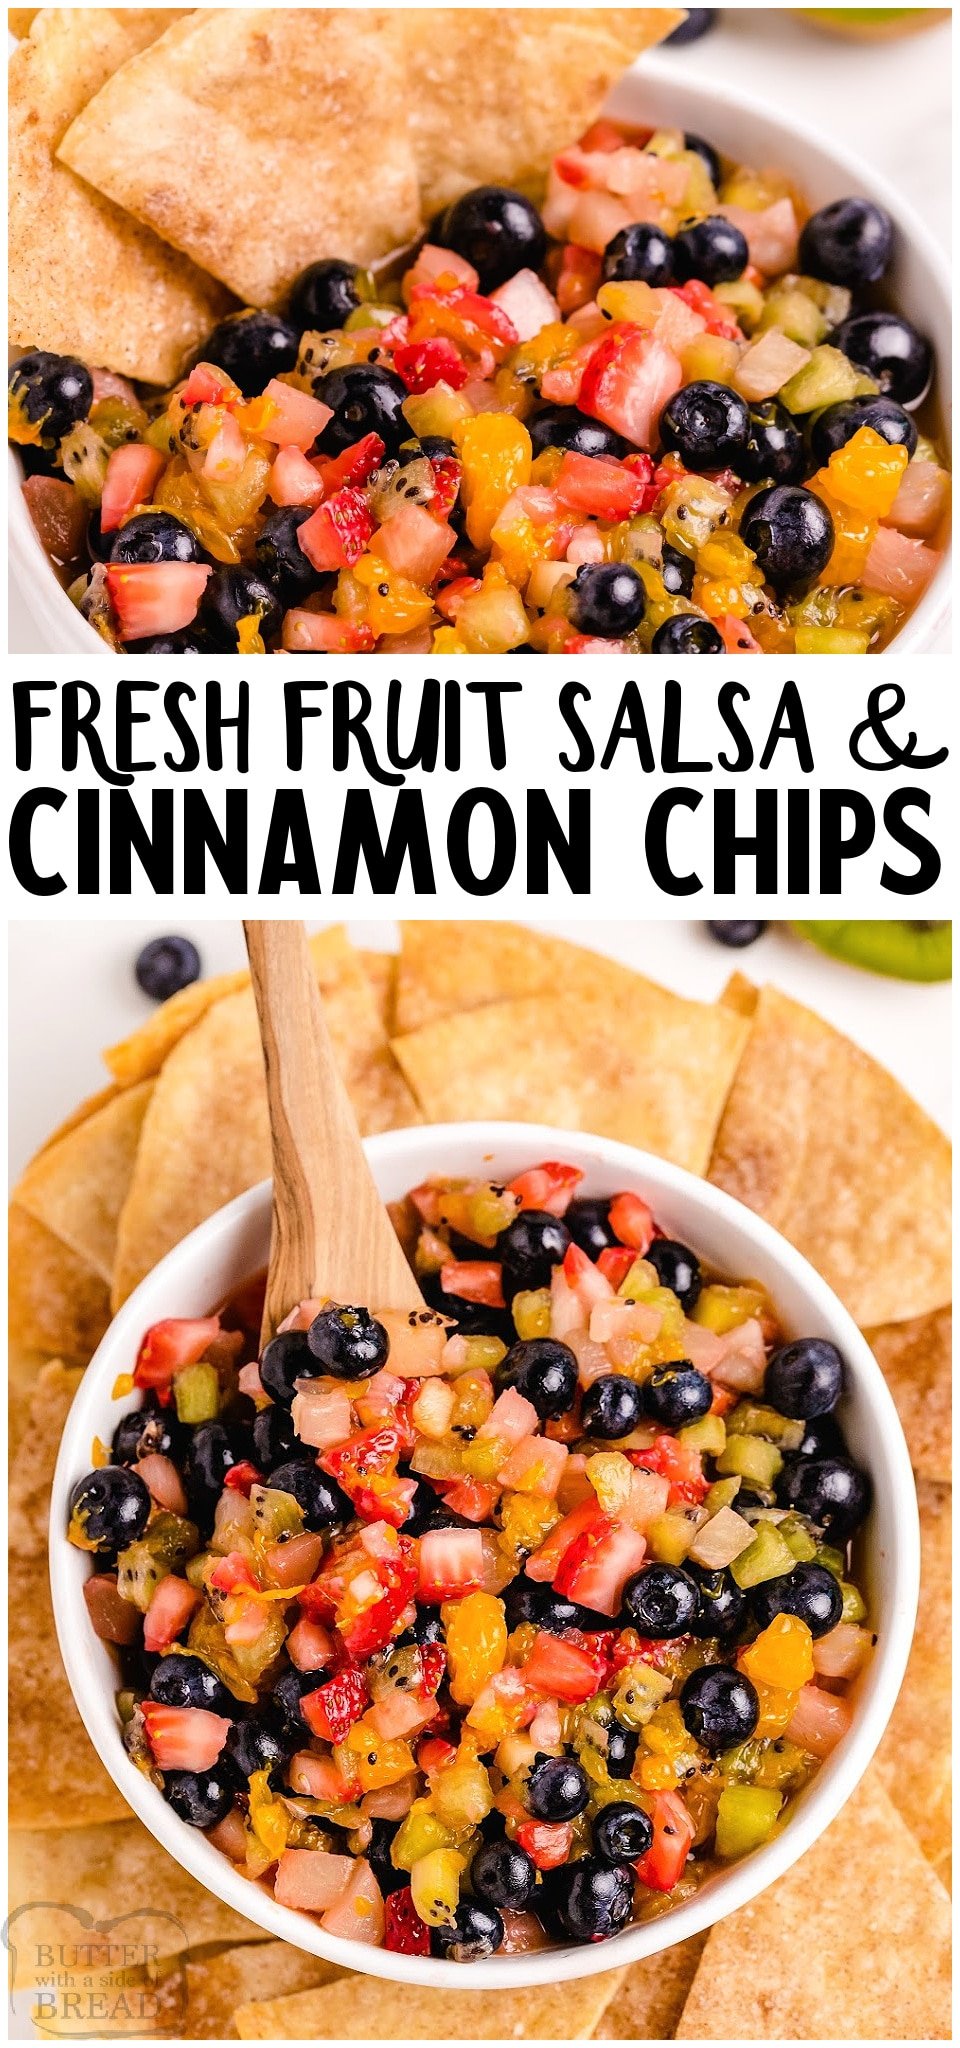 Fresh Fruit Salsa with buttery baked cinnamon chips for a fun & tasty snack or treat! Easy fruit salsa recipe that everyone raves about. It's perfect for any gathering!